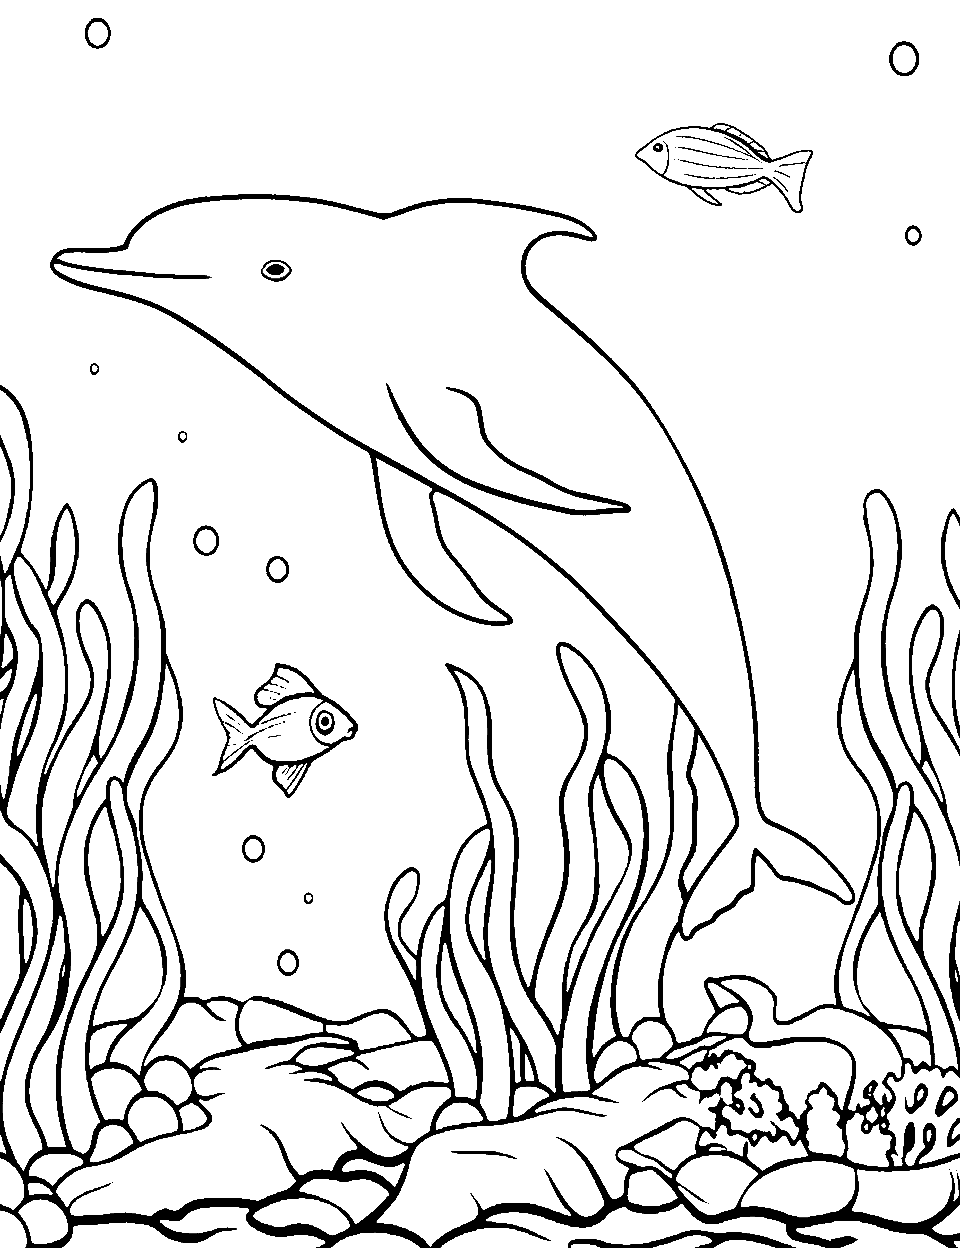 35 Dolphin Coloring Pages: Free Printable Sheets